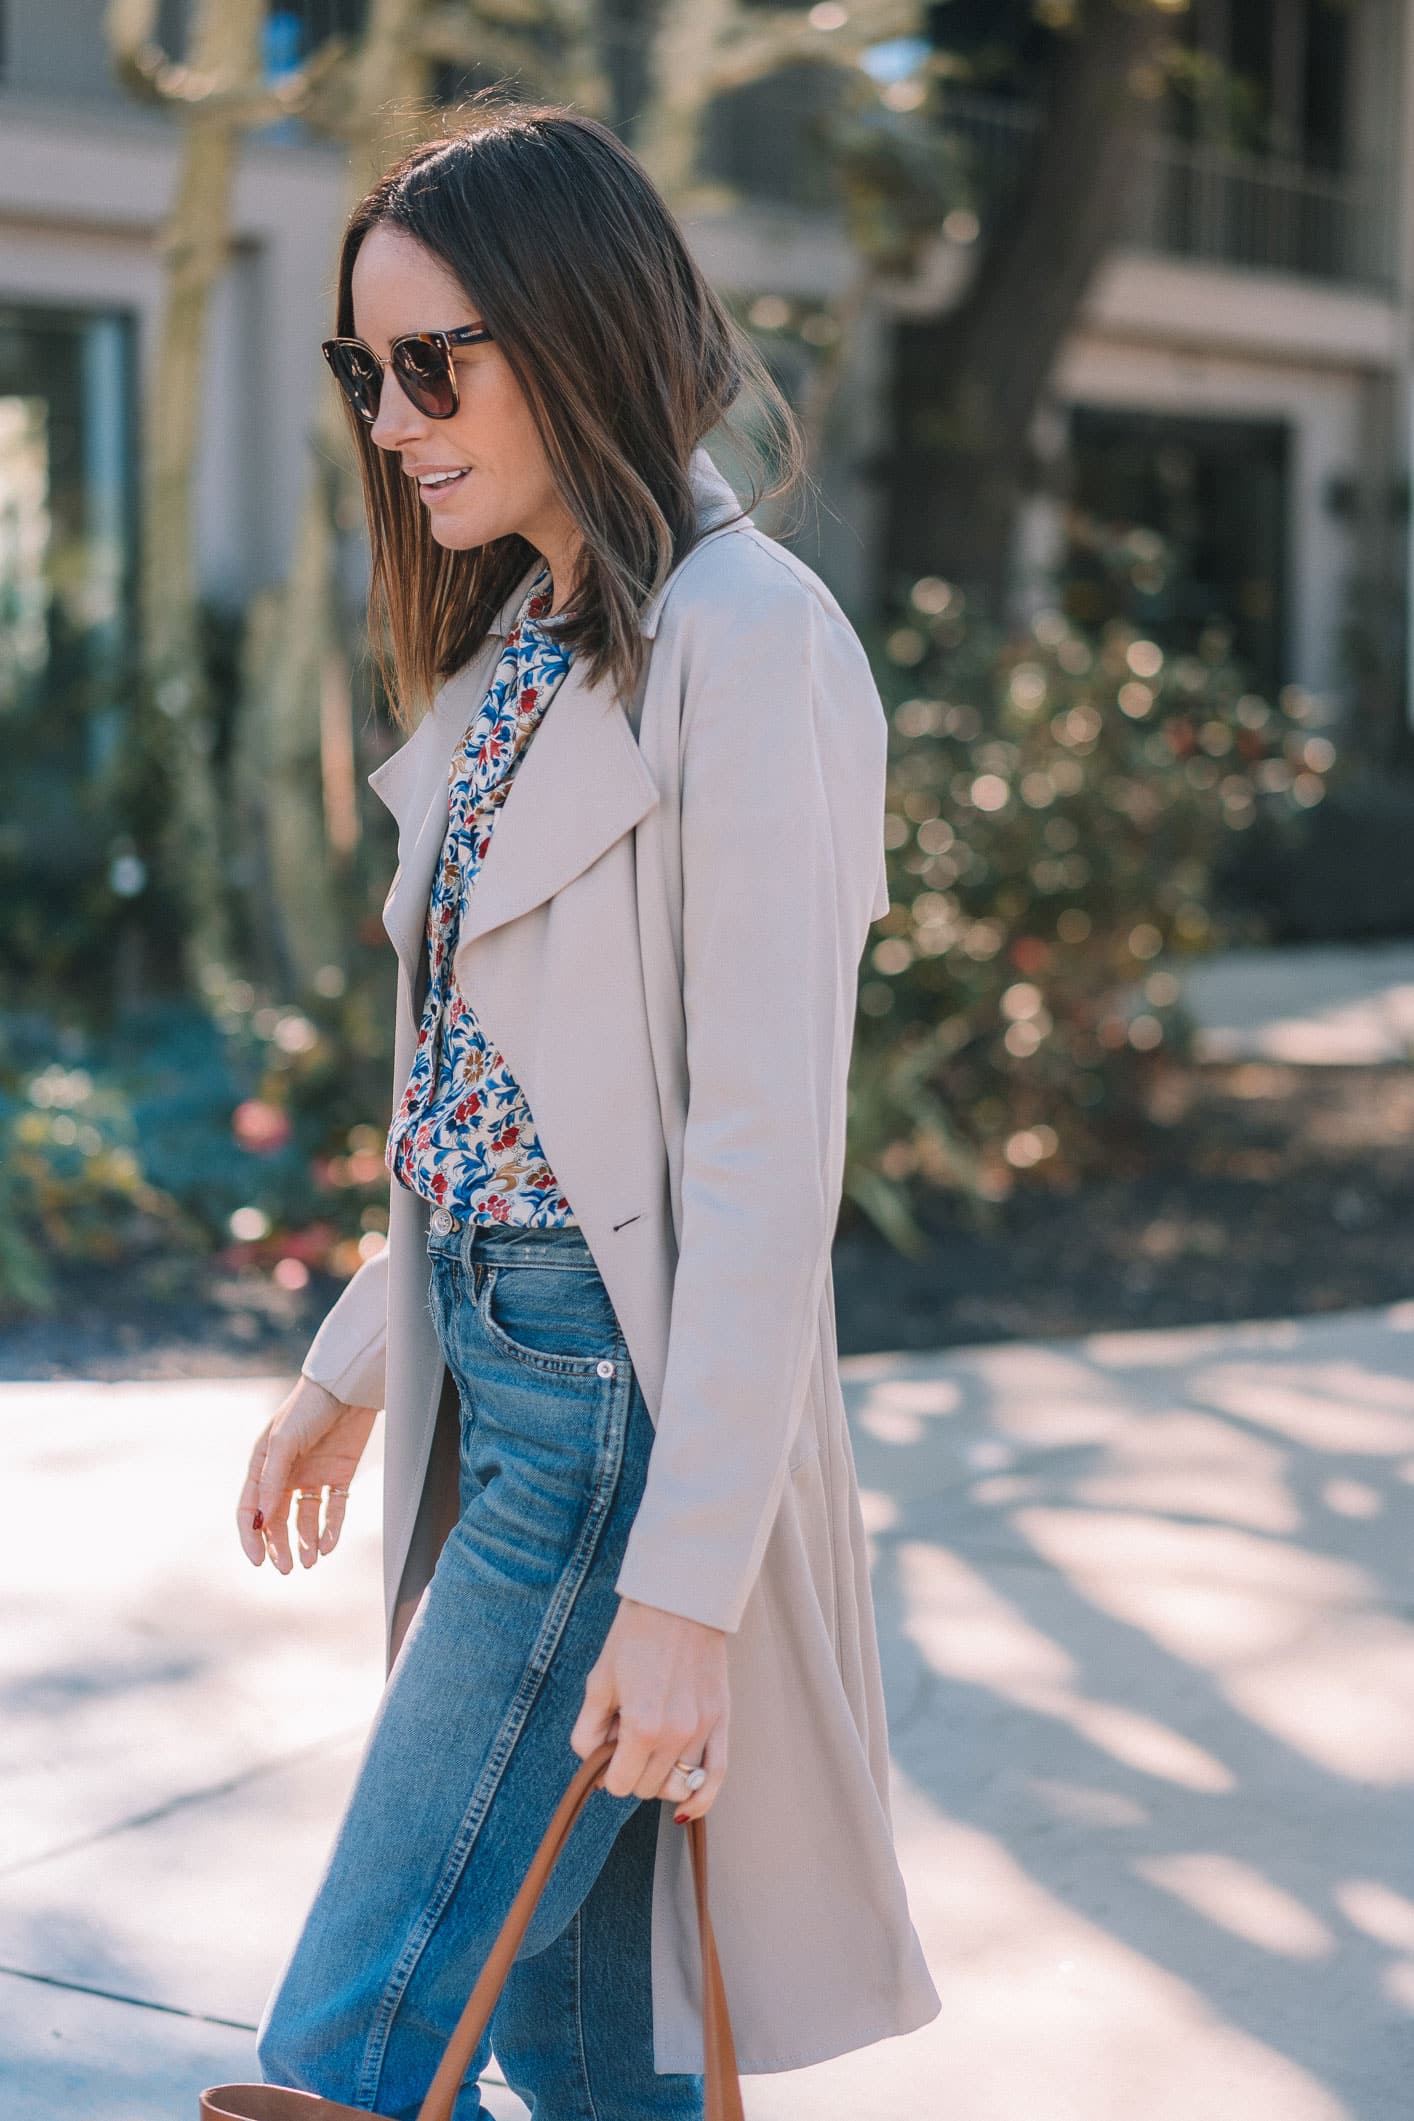 Louise Roe Wearing A Trench Coat and Jeans